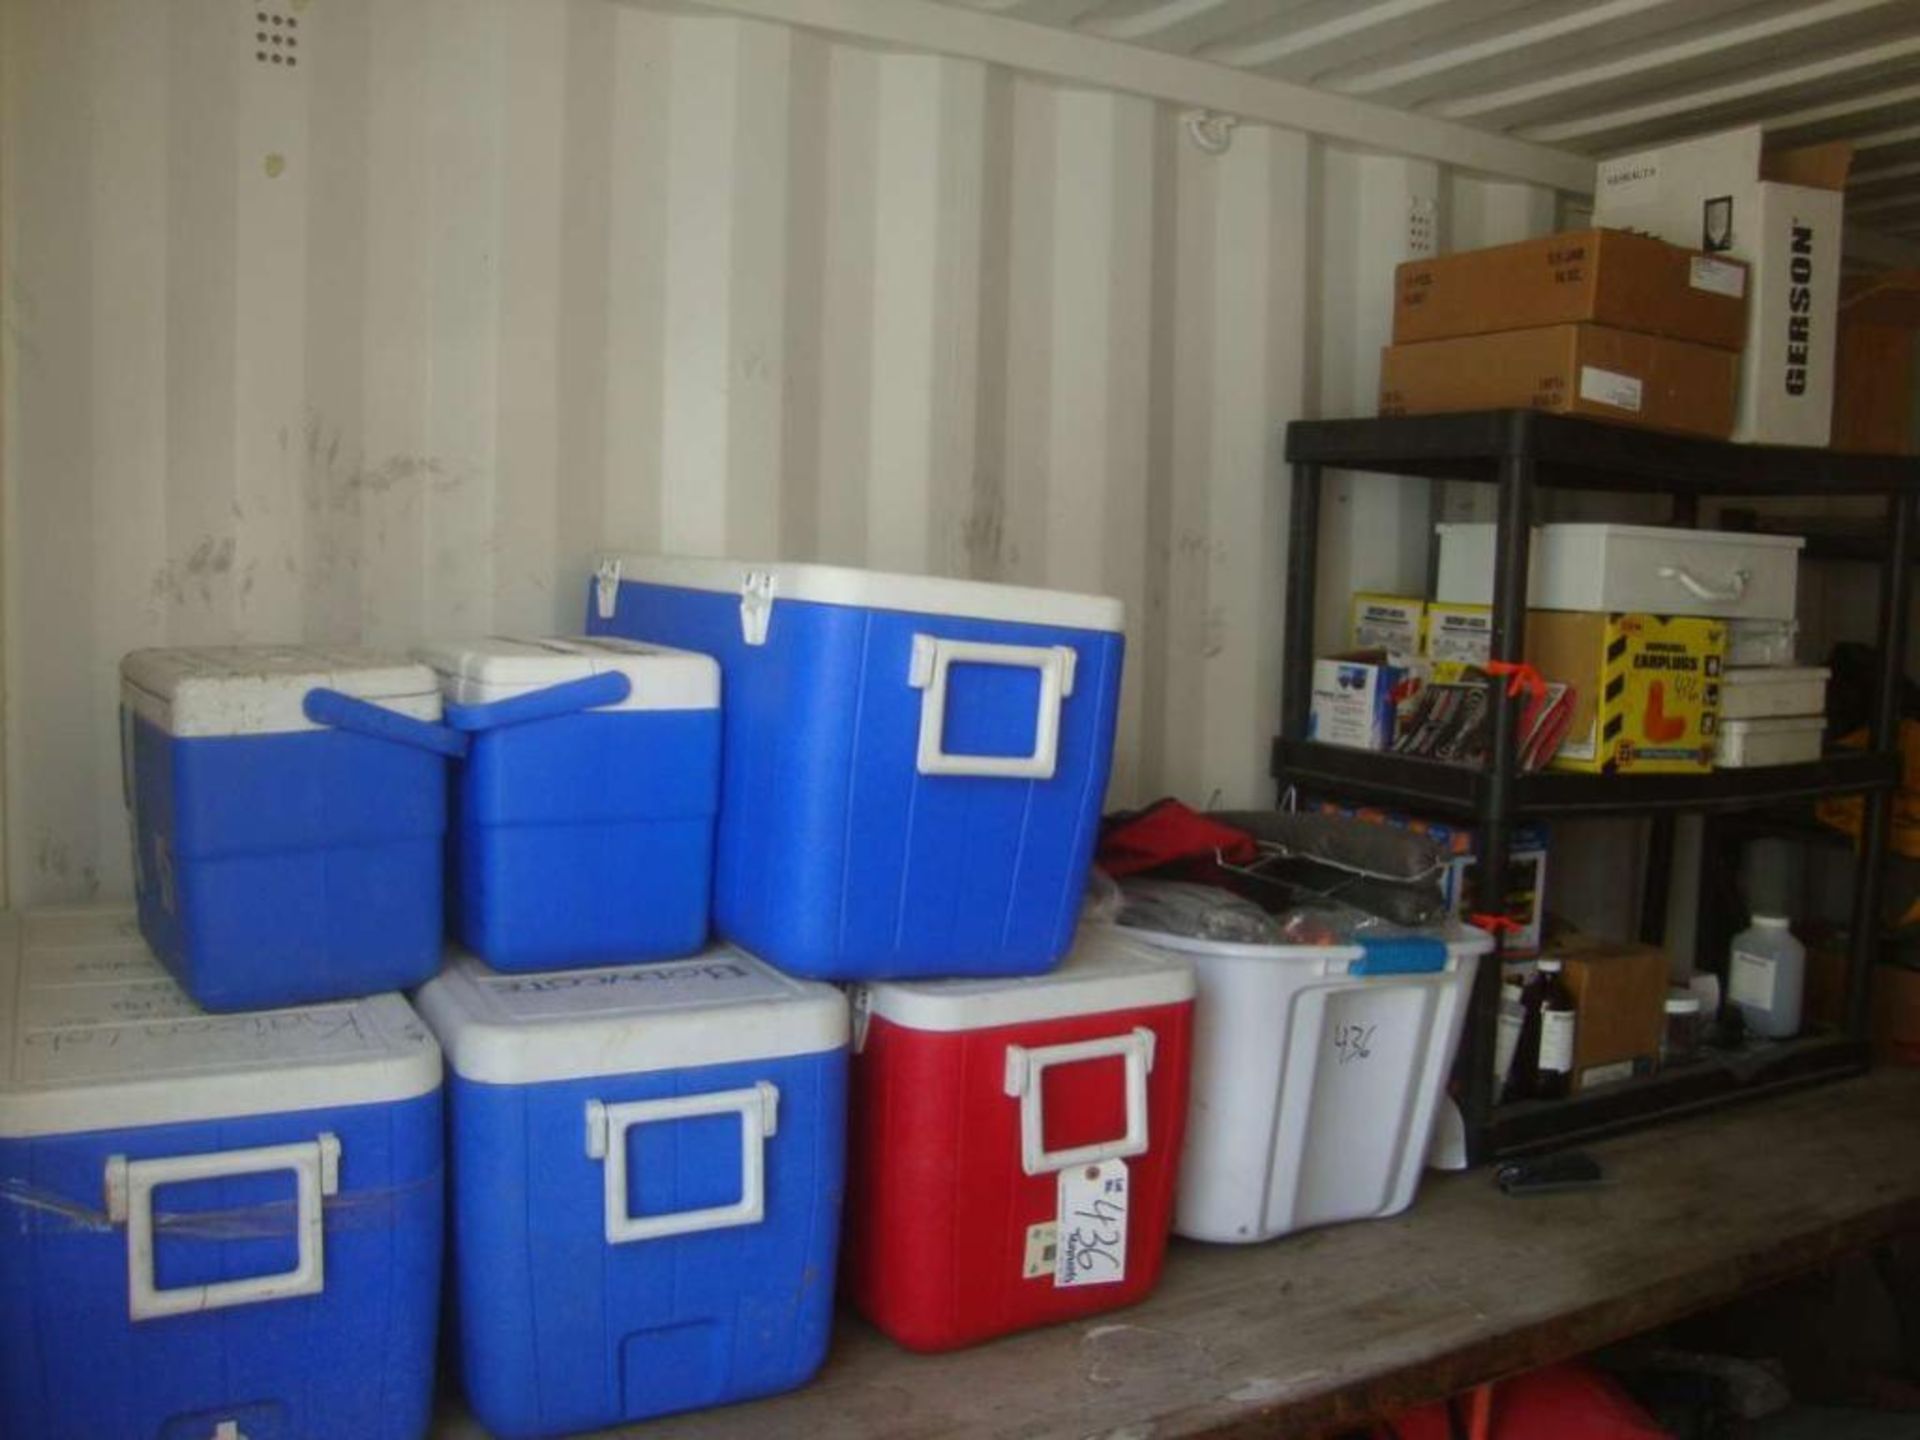 Lot of coolers and first aid kits